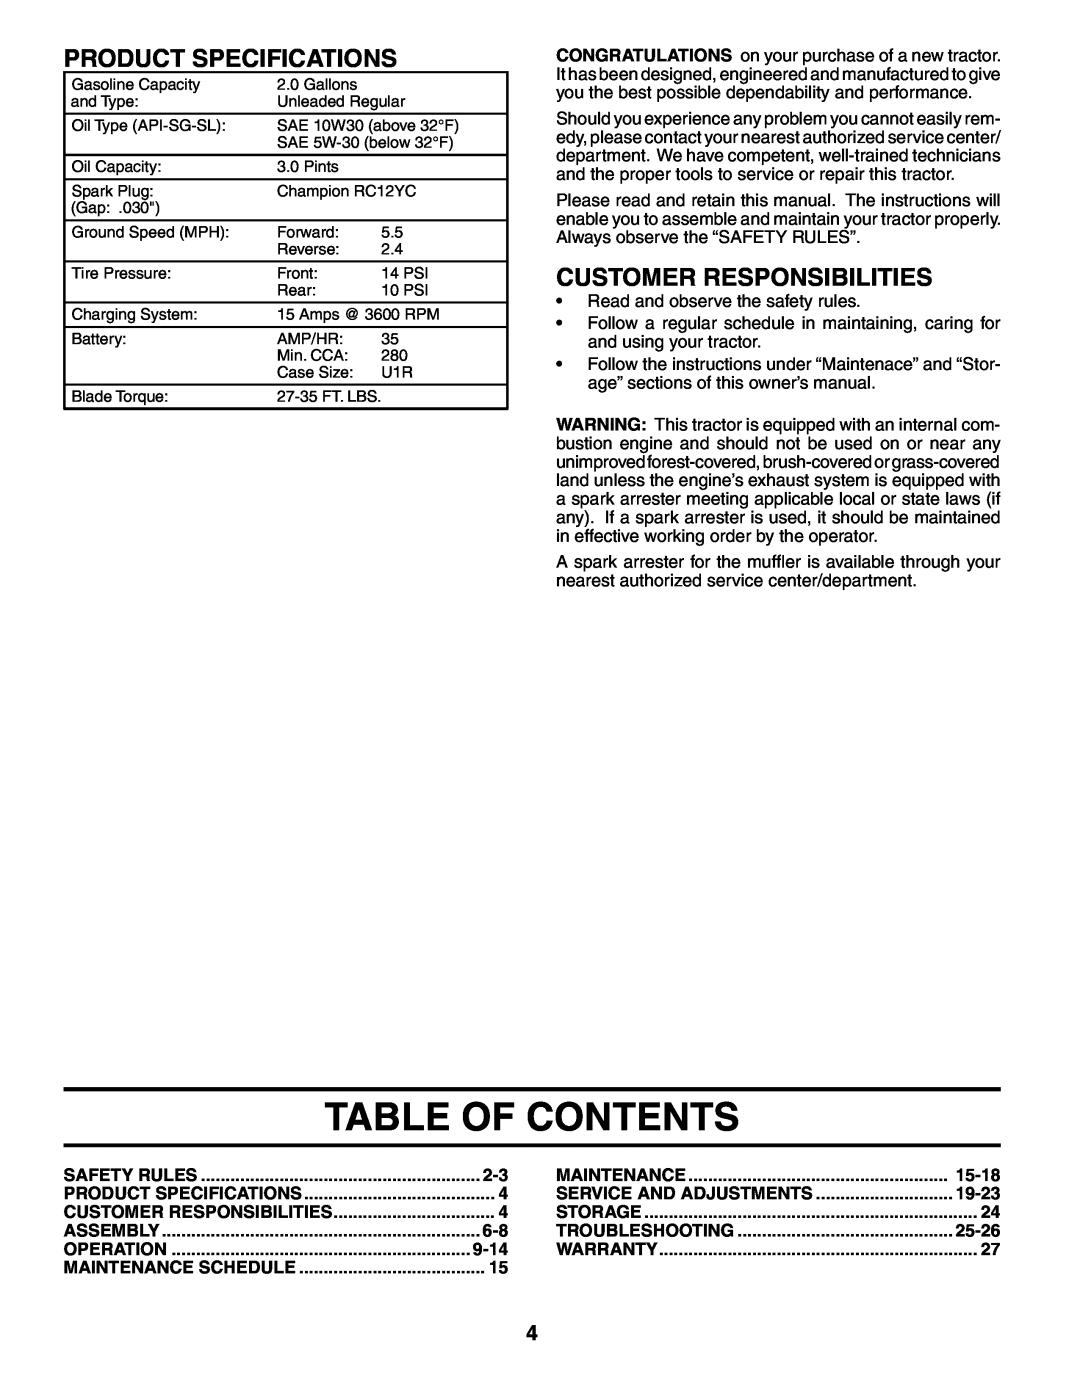 Poulan HDK19H42 manual Table Of Contents, Product Specifications, Customer Responsibilities 